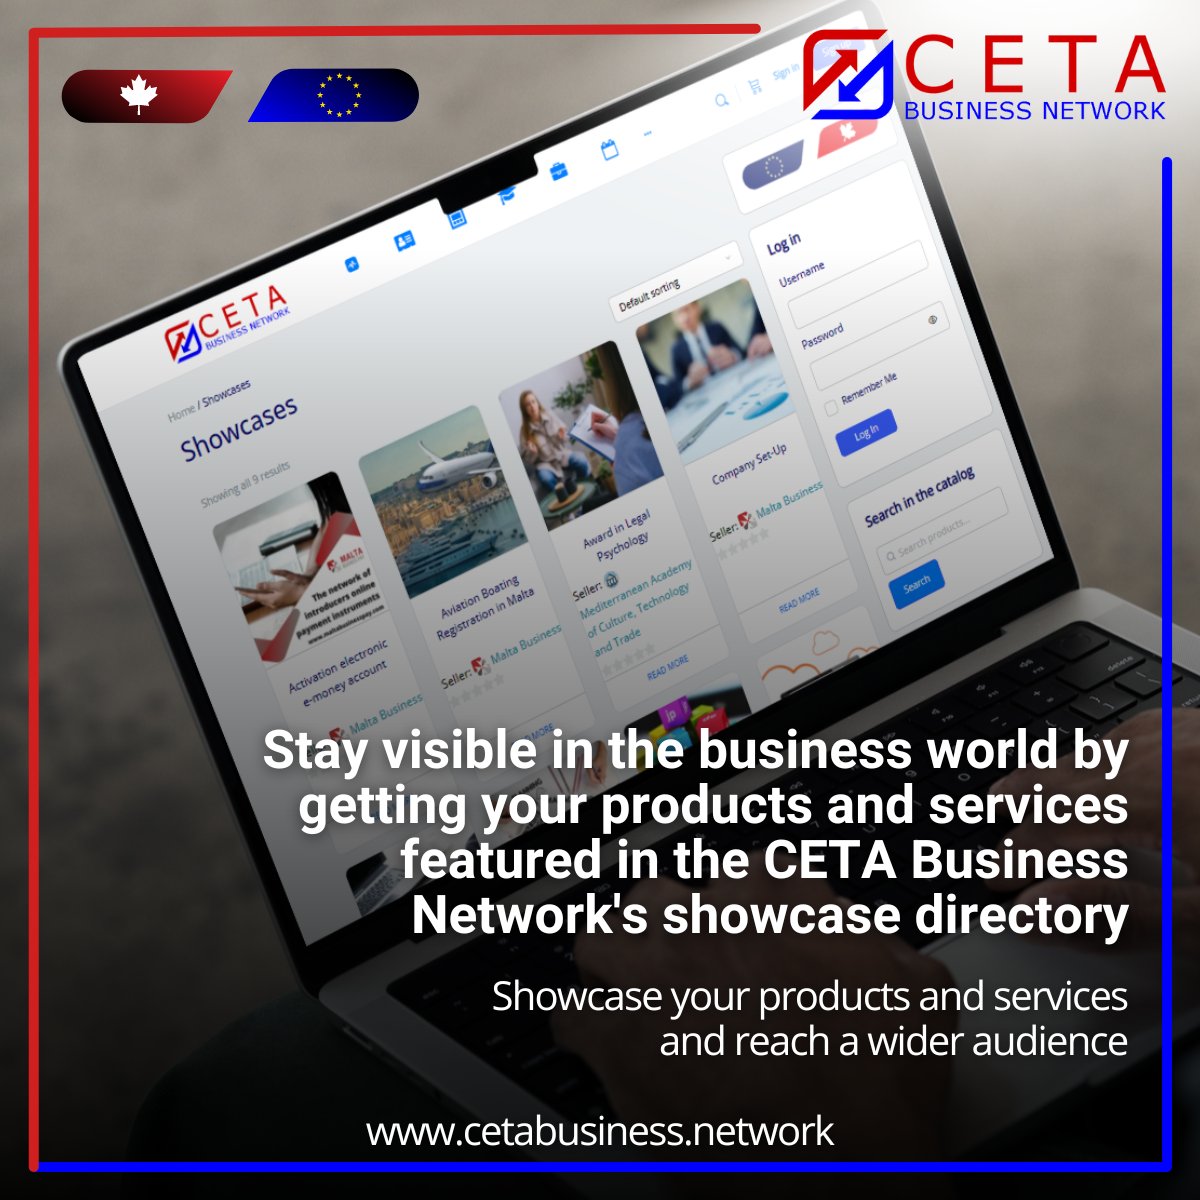 Keep your #products and #services top-of-mind by getting featured in the #CETABusinessNetwork's #showcase directory. Connect with potential #clients and #partners.
cetabusiness.network/showcases/